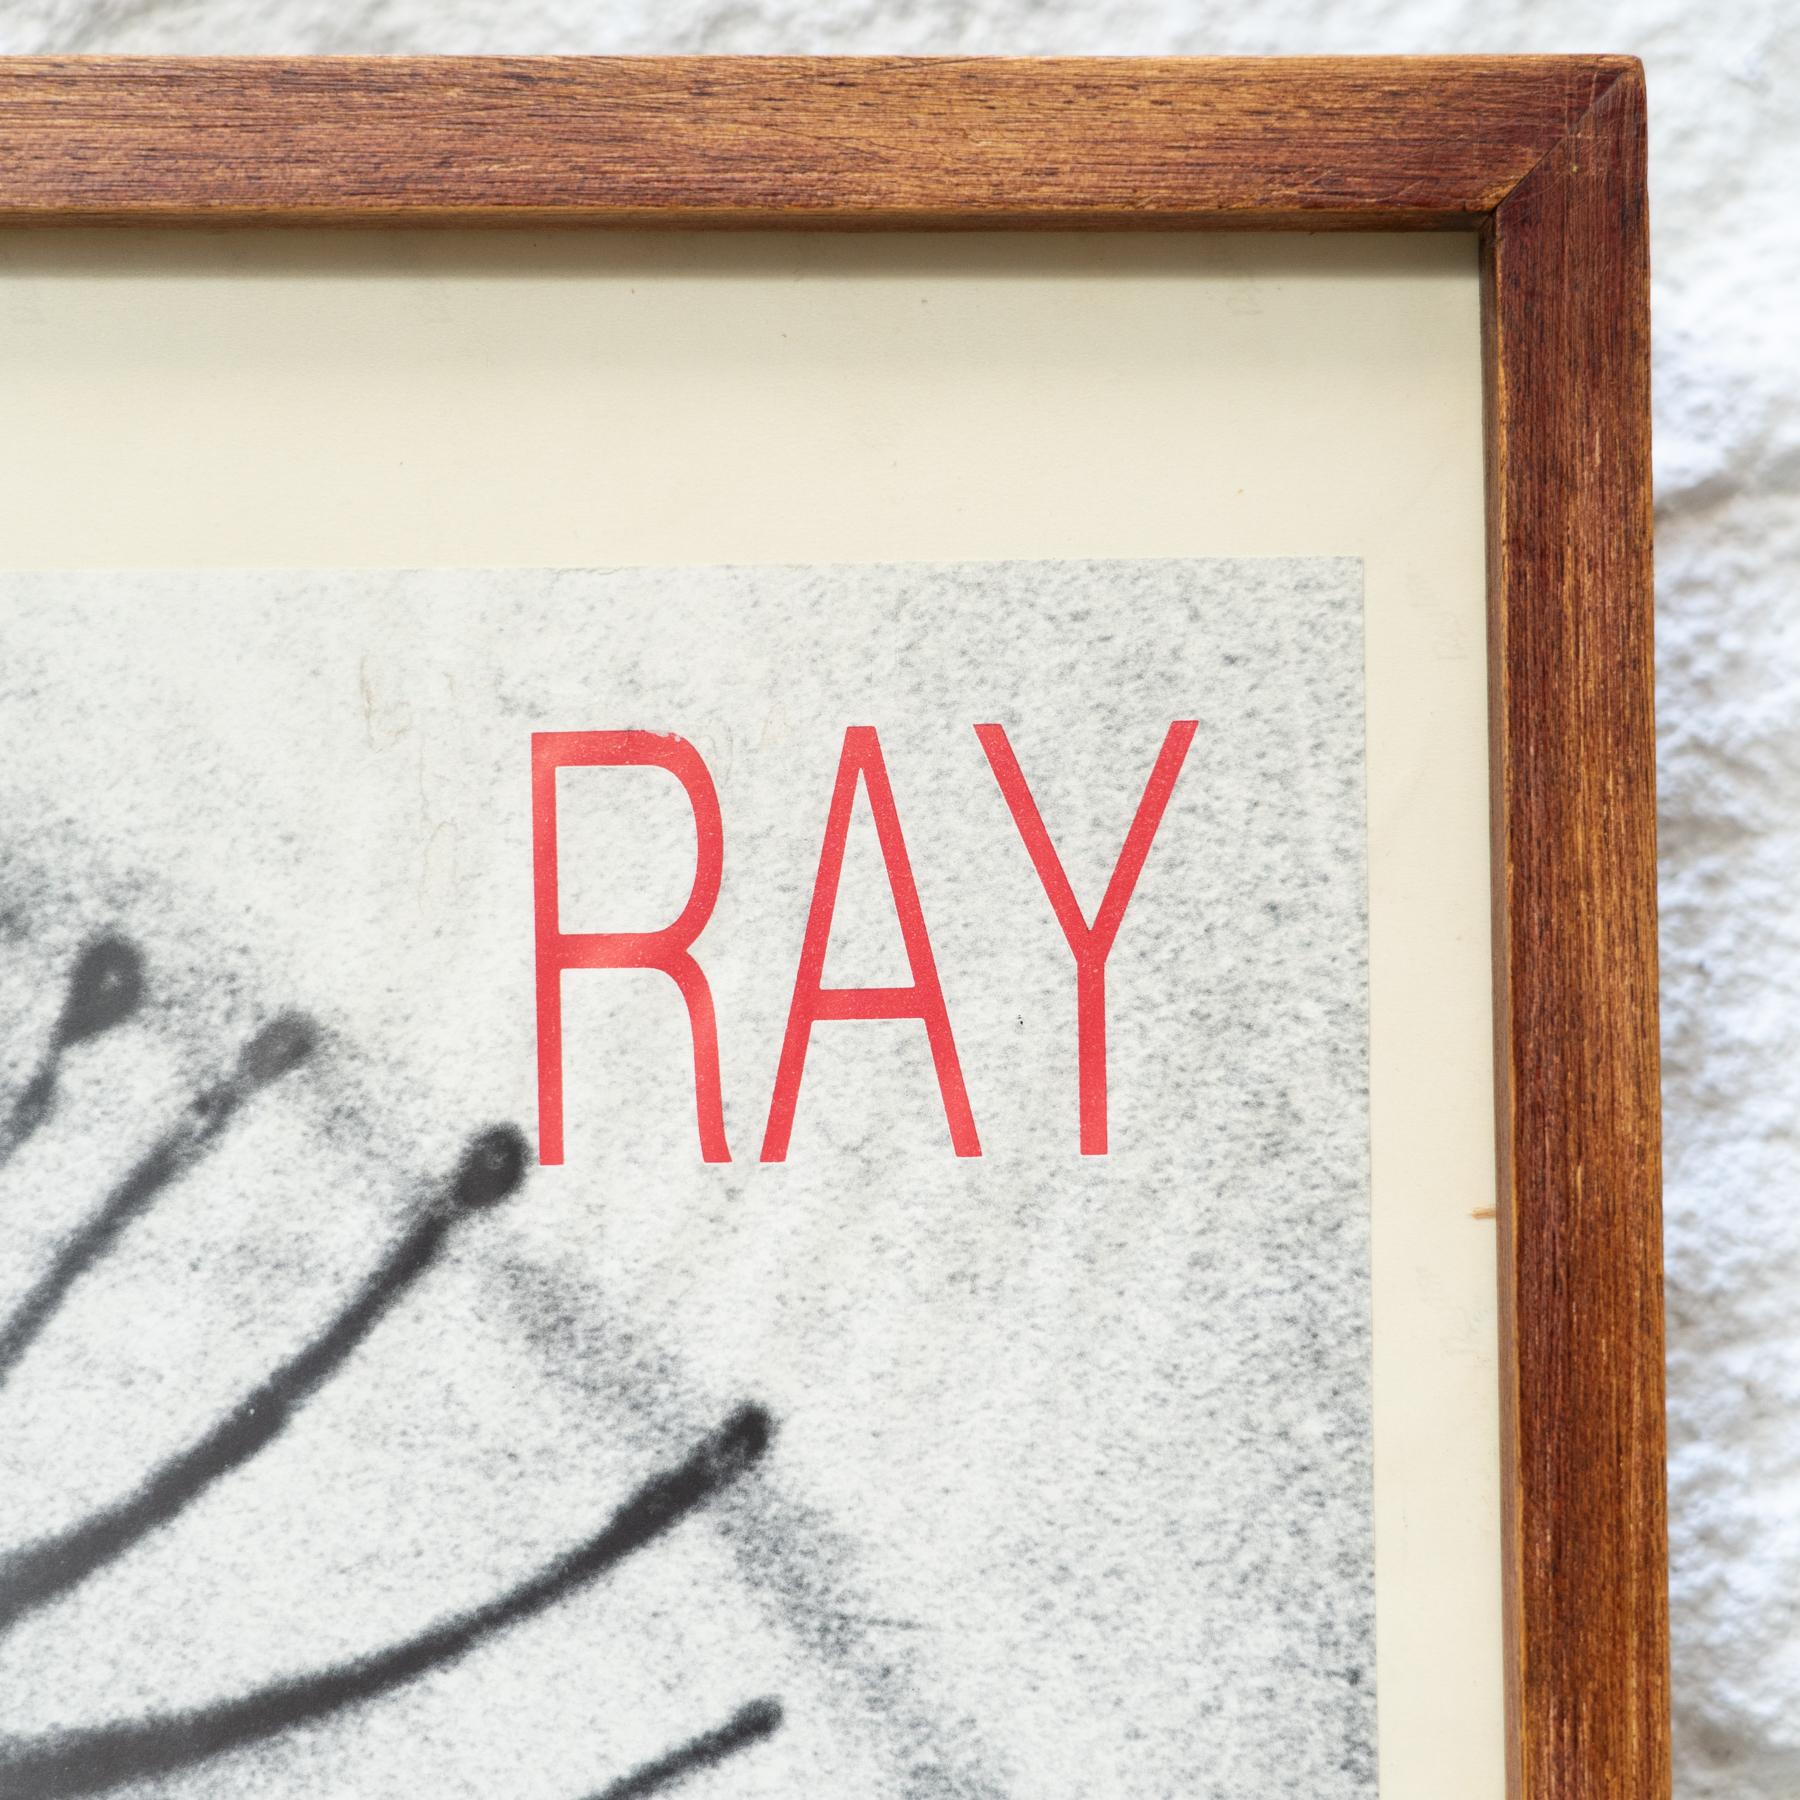 Paper Framed Poster of Man Ray Exhibition in Galeria Spectrum Zaragoza, 1986 For Sale